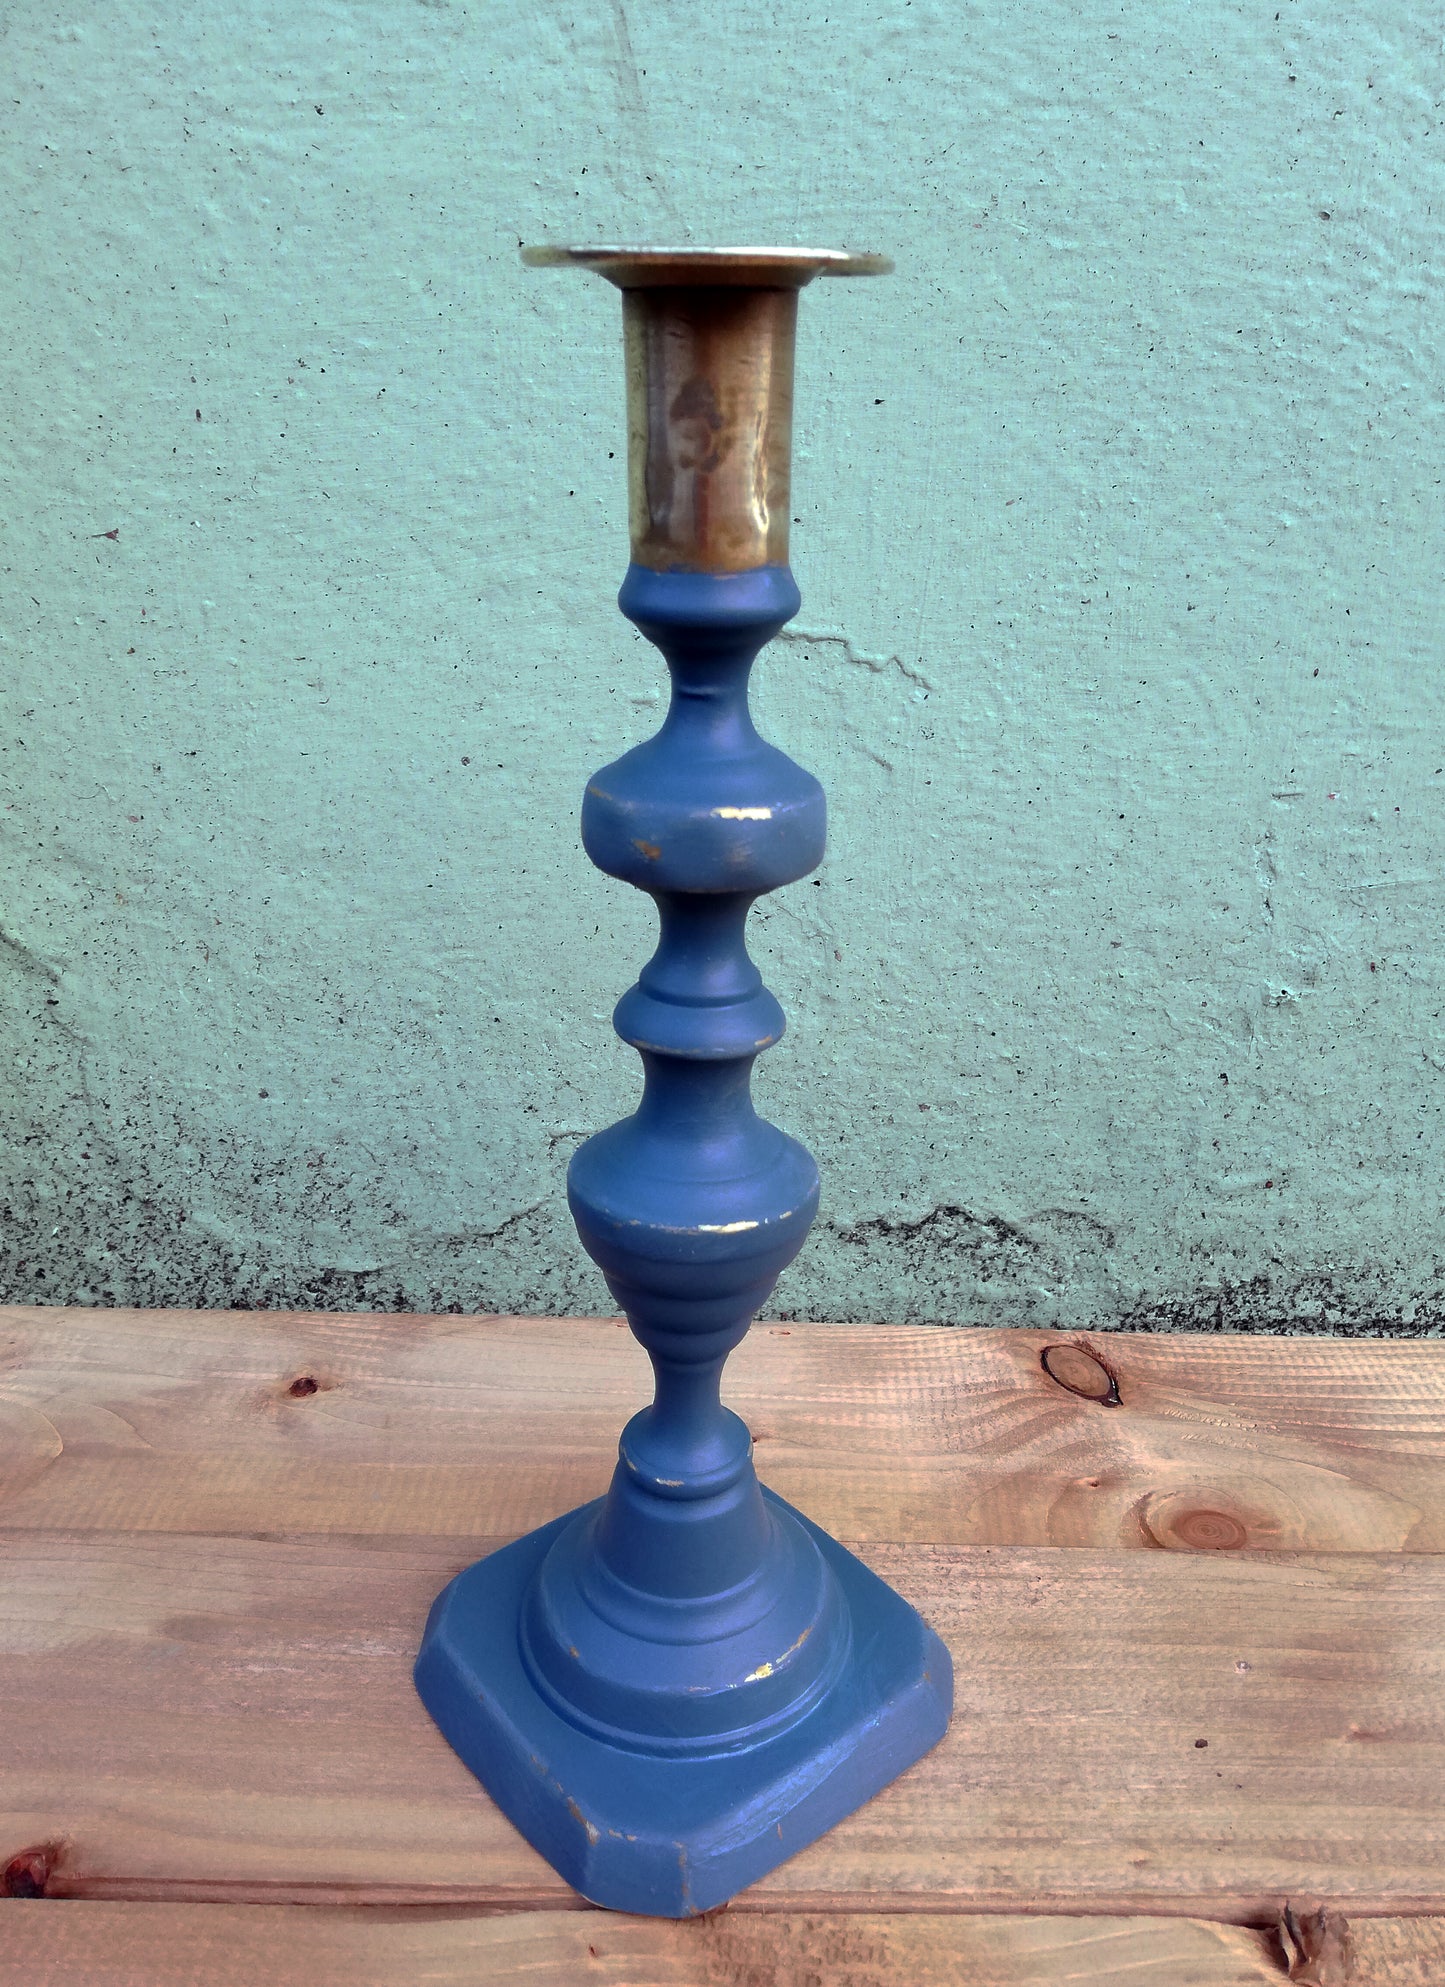 Vintage brass candlestick restored and painted in Fusion Mineral Paint